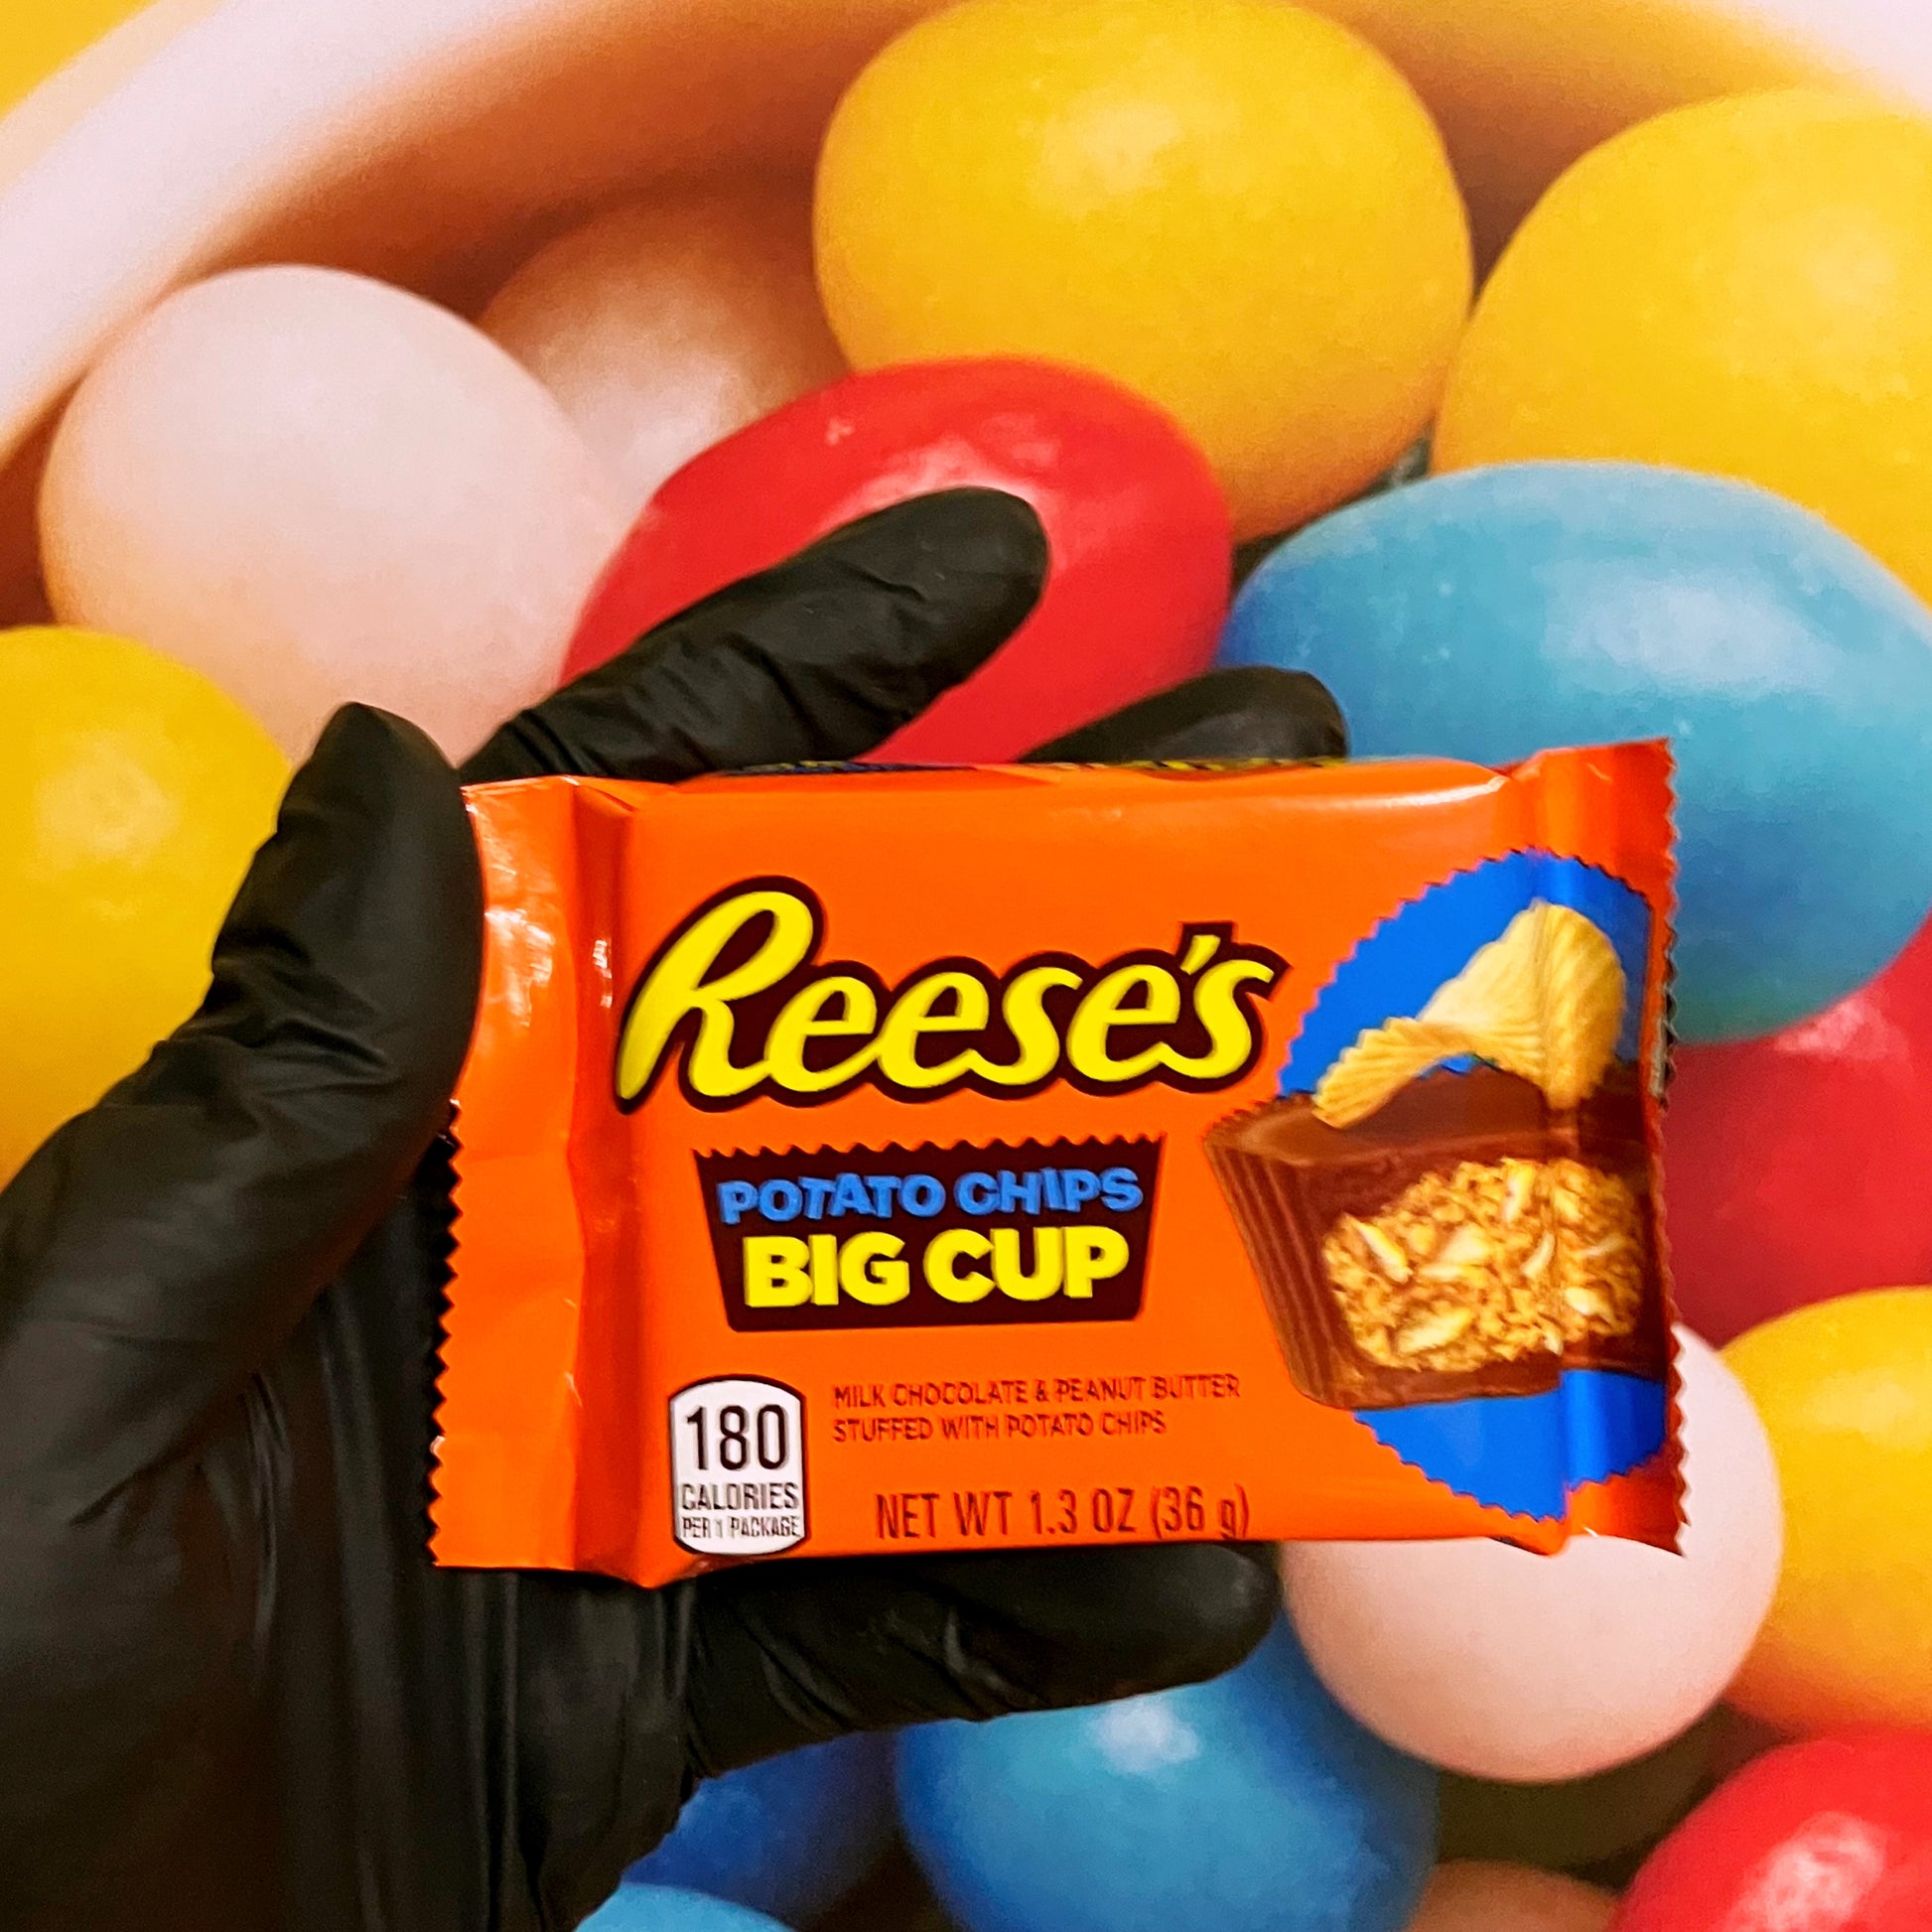 Reese's Big Cup with Potato Chips 37g Reese